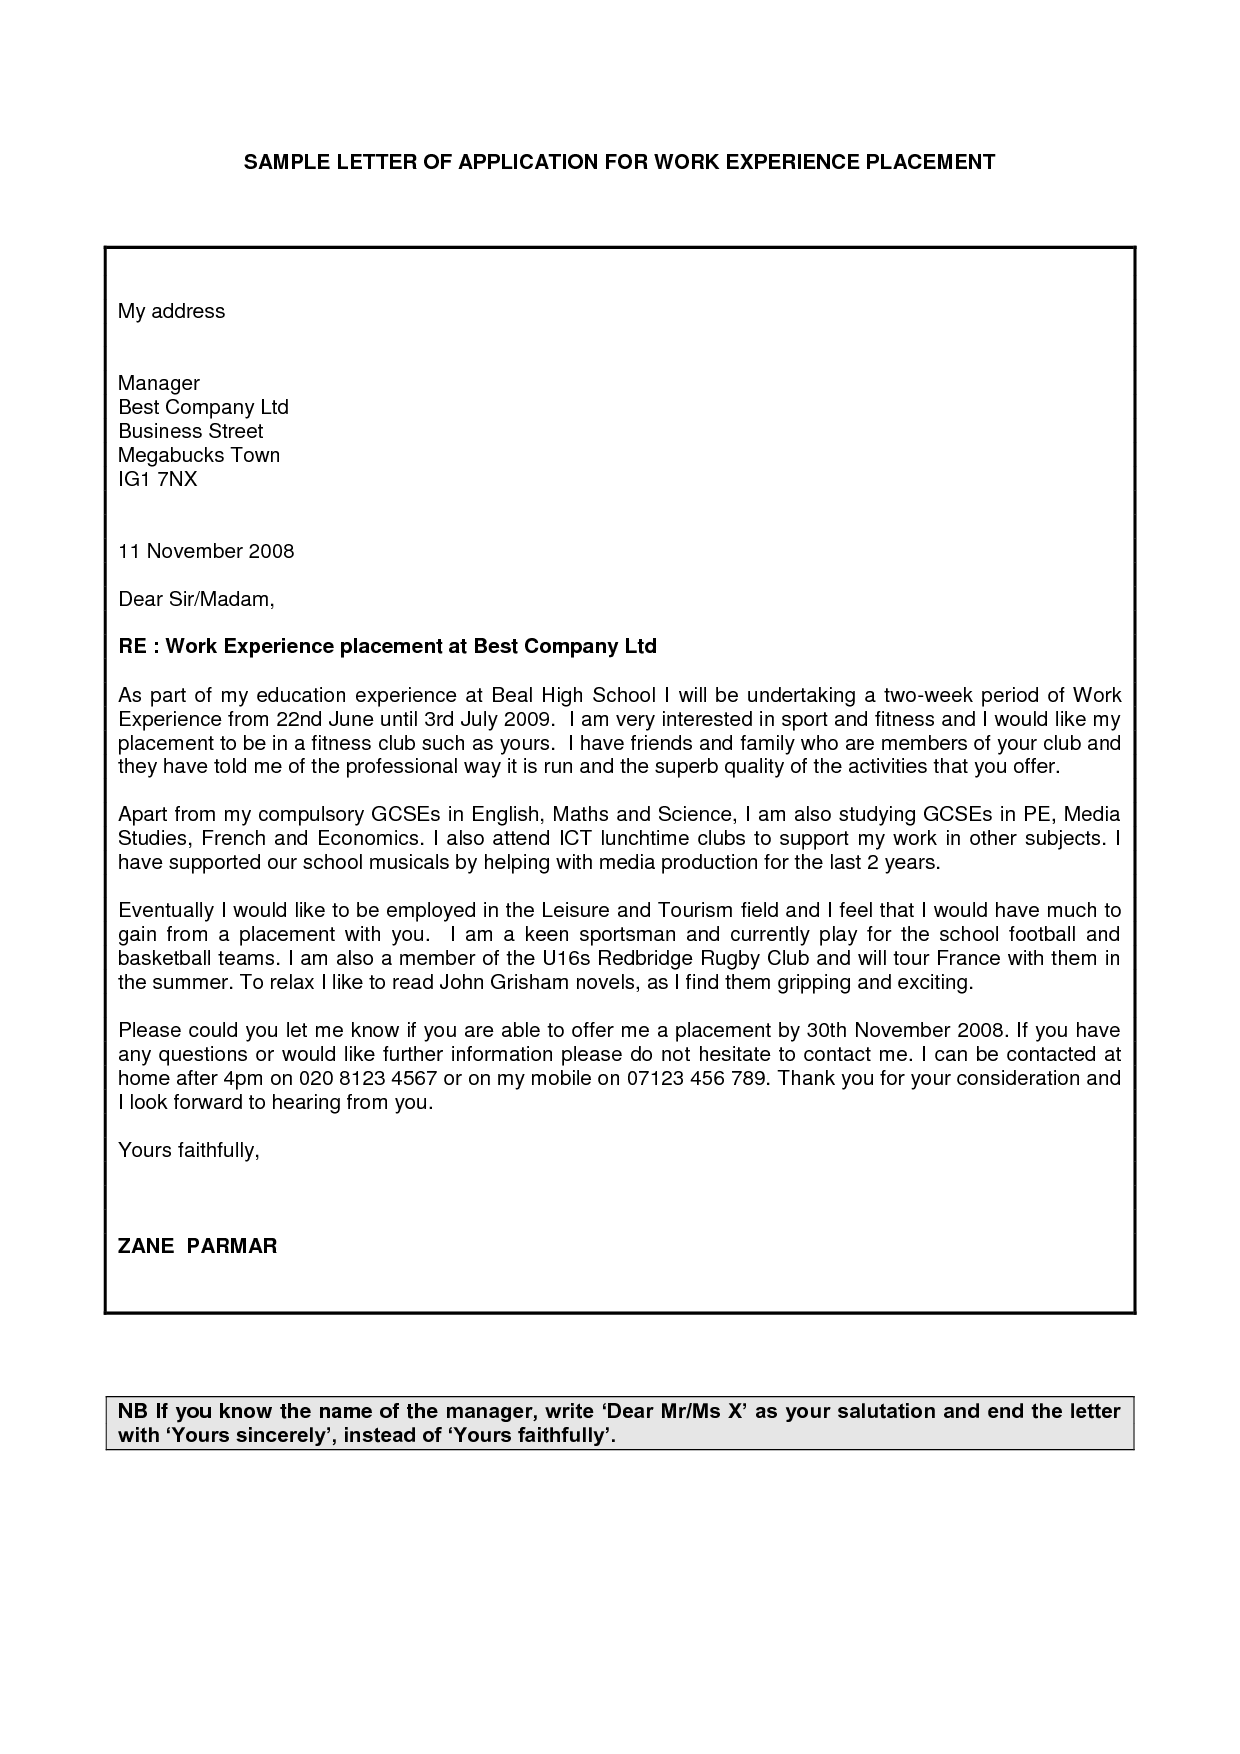 Application Letter In Work letter of application work experience